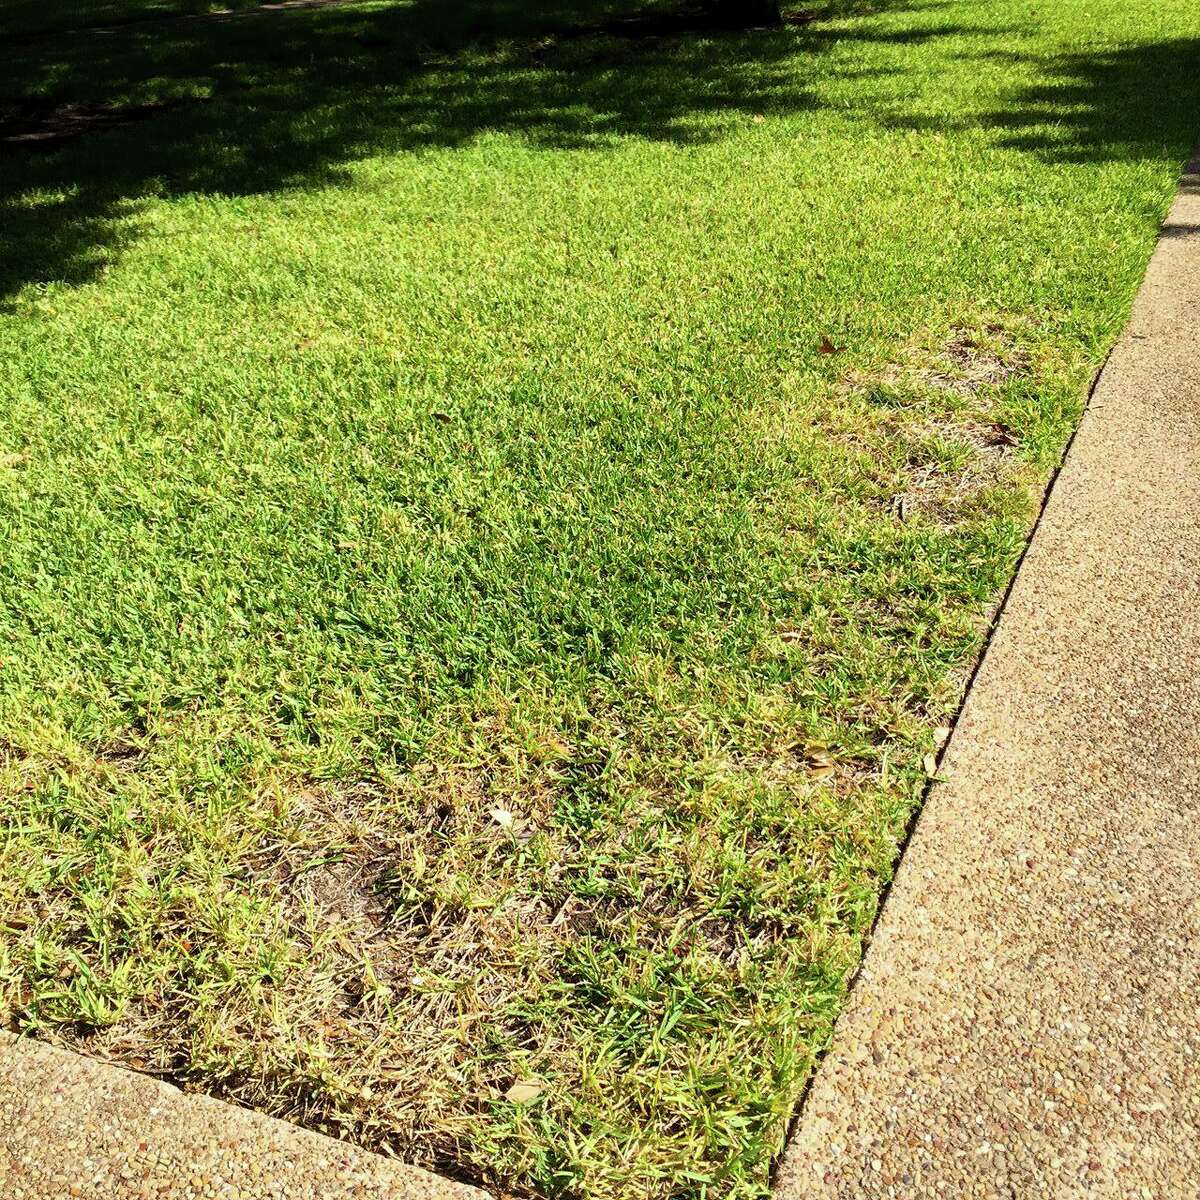 Chinch bugs are most likely the cause of this dead-looking patch of St. Augustine grass.